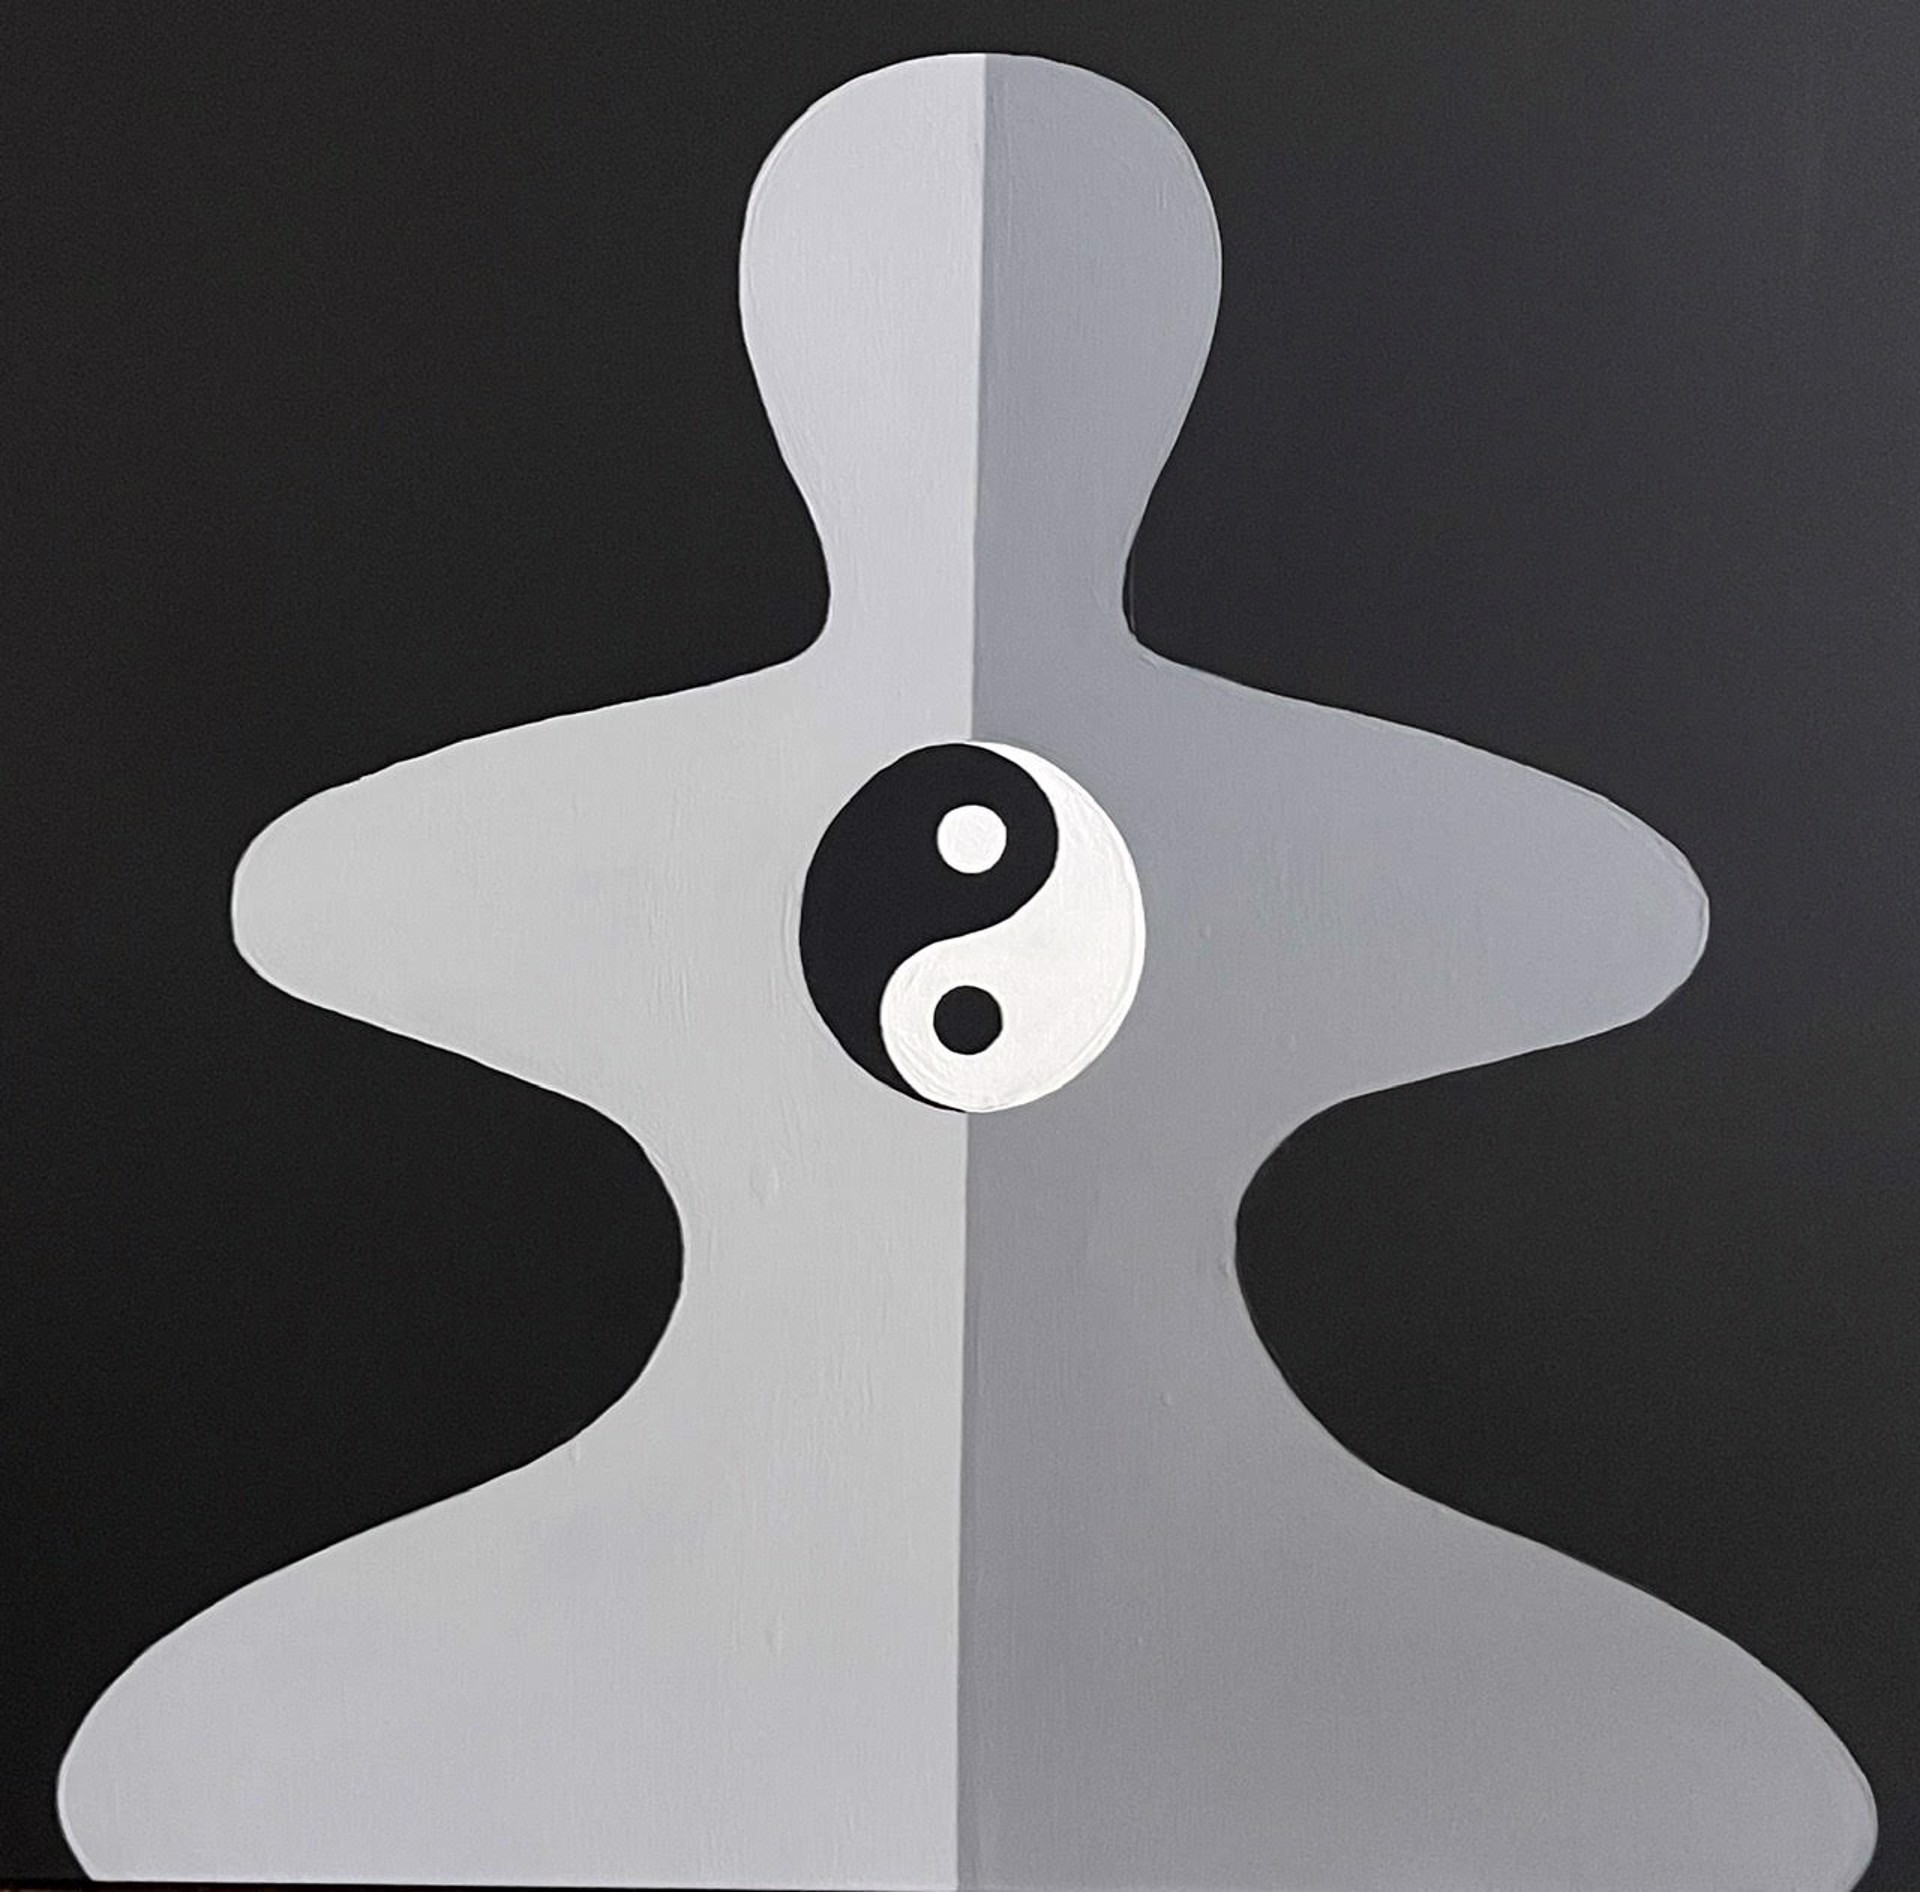 Finding Center - Yin and Yang by Brent Land